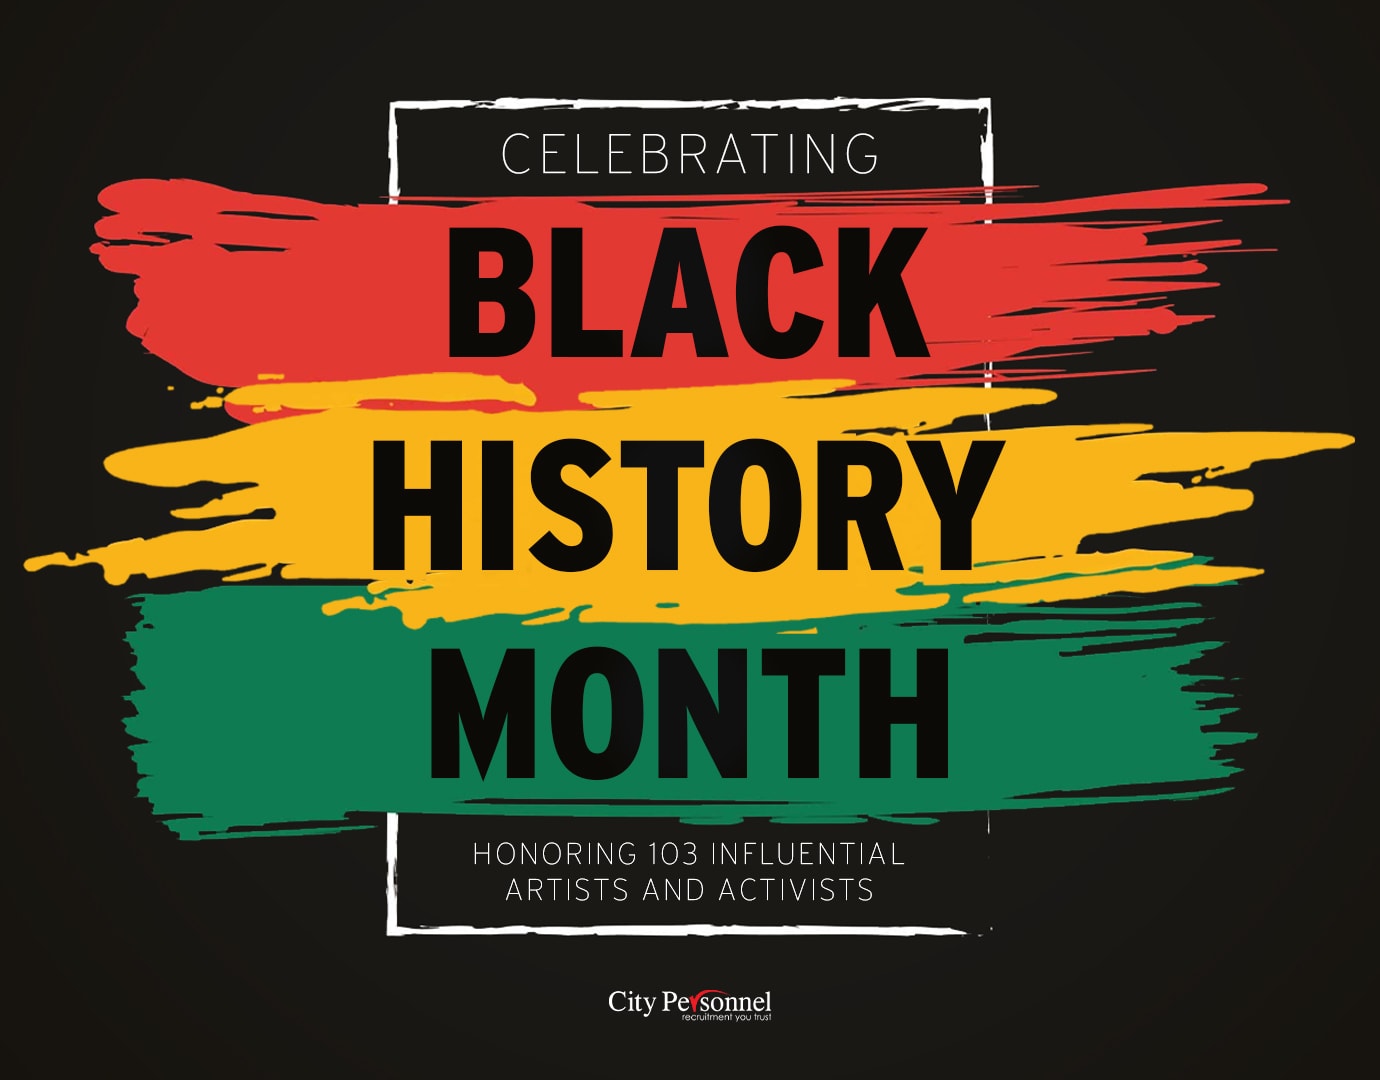 Celebrating Black History Month - Honoring 103 Influential Artists and Activists